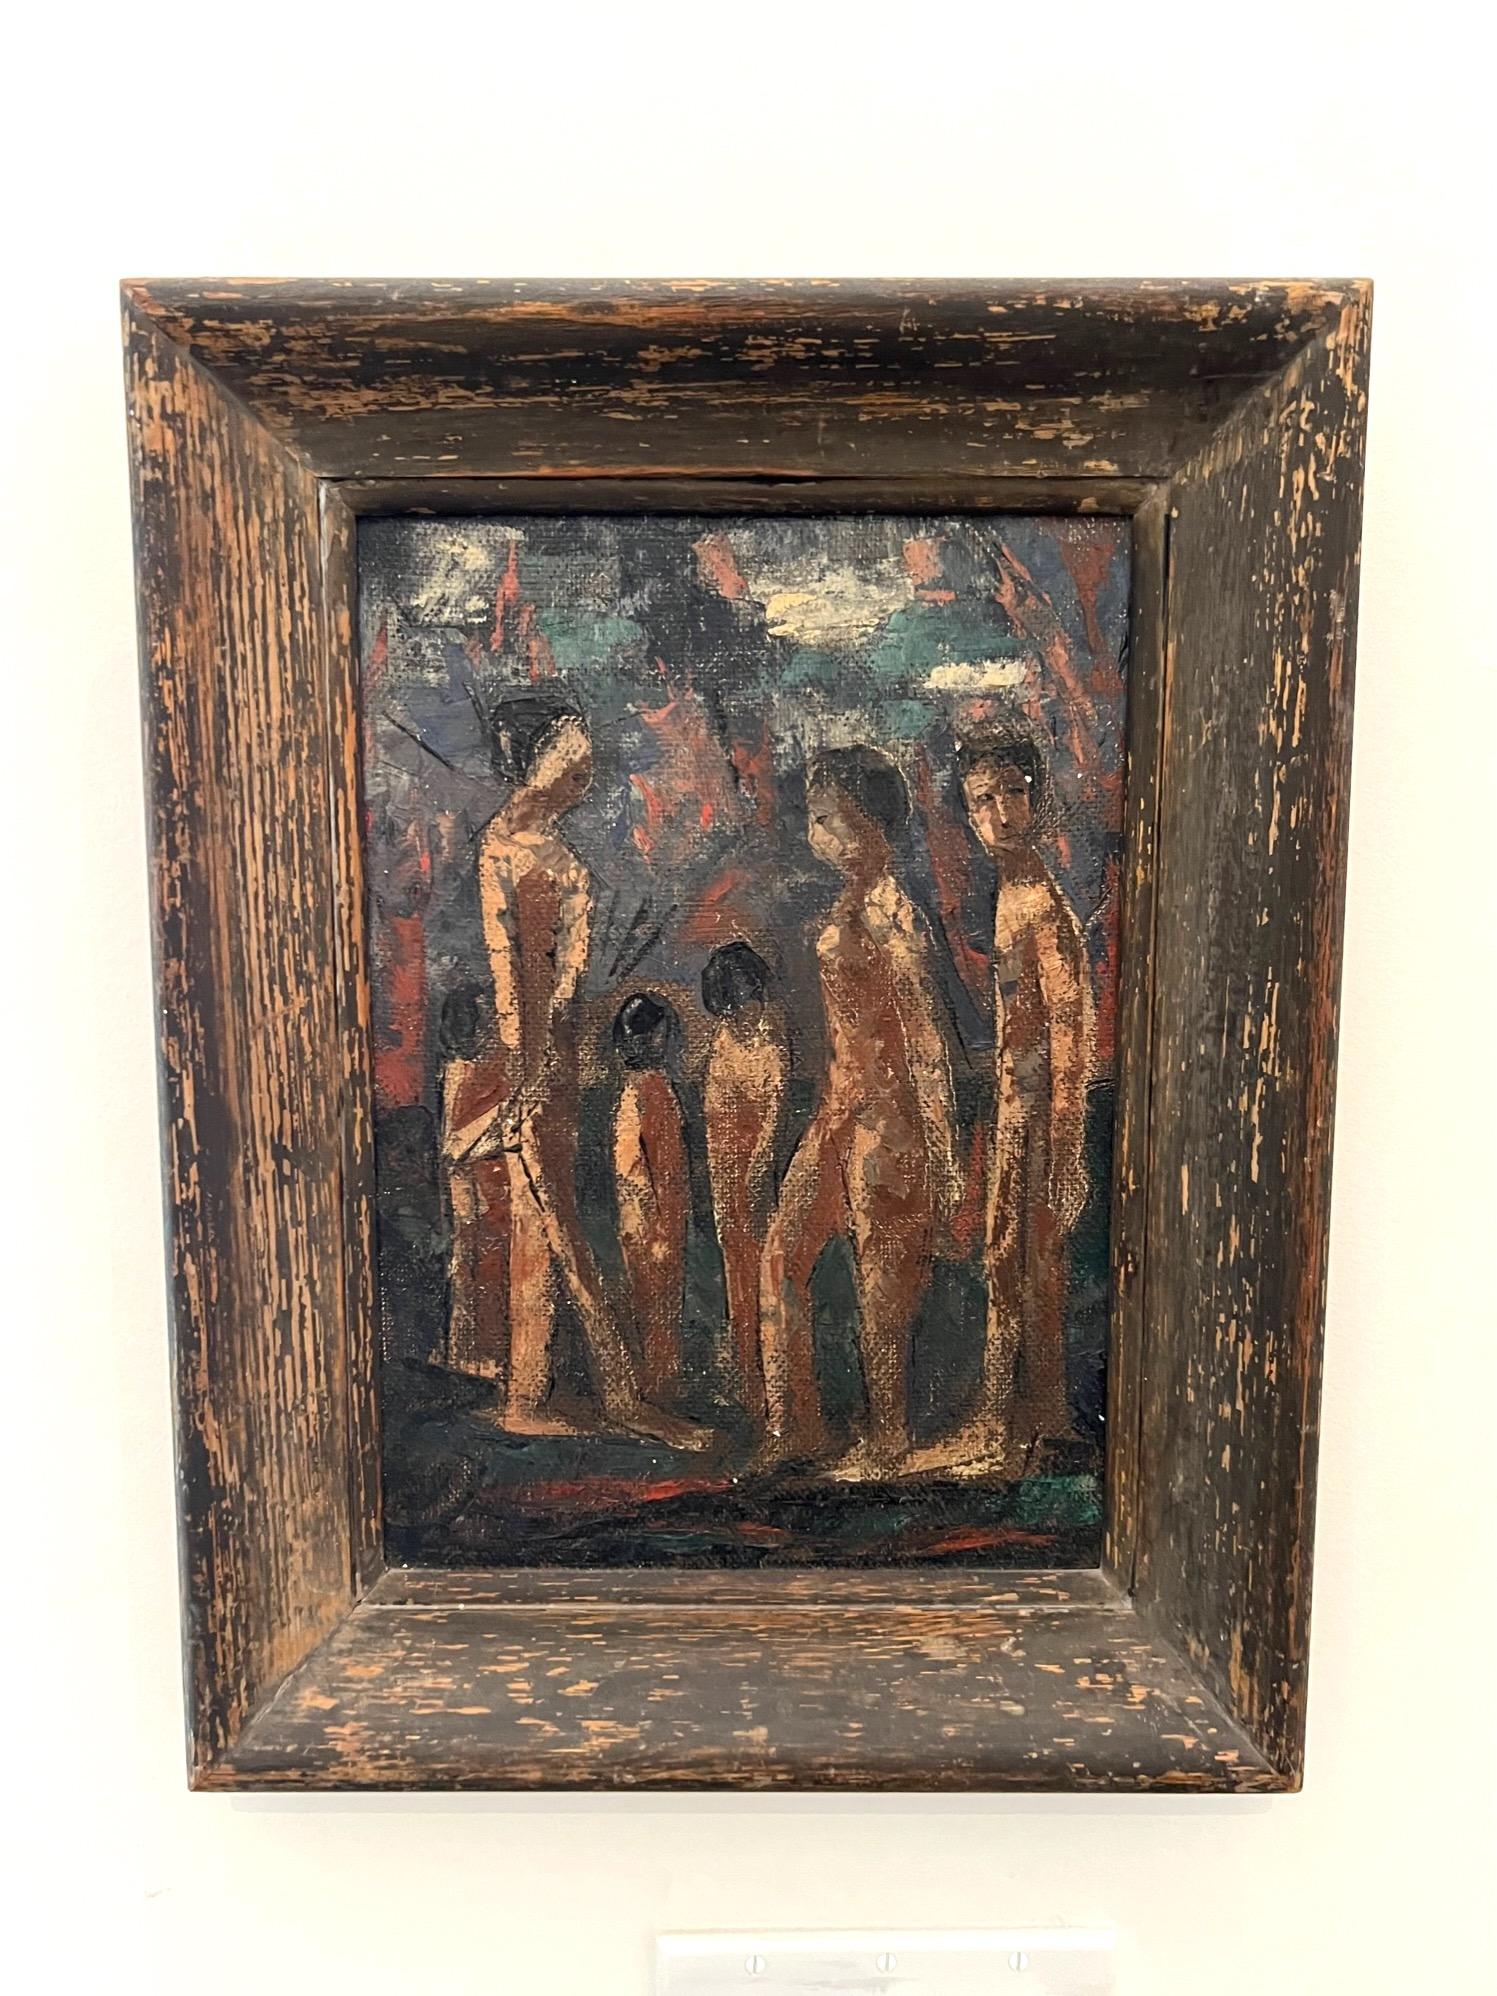 Outstanding 1940's oil on board painting in original custom shadowbox wood frame with distressed finish. The figural painting depicts an indigenous people or tribe unclothed, in what appears to be a wooded area with perhaps some semblance of clouds